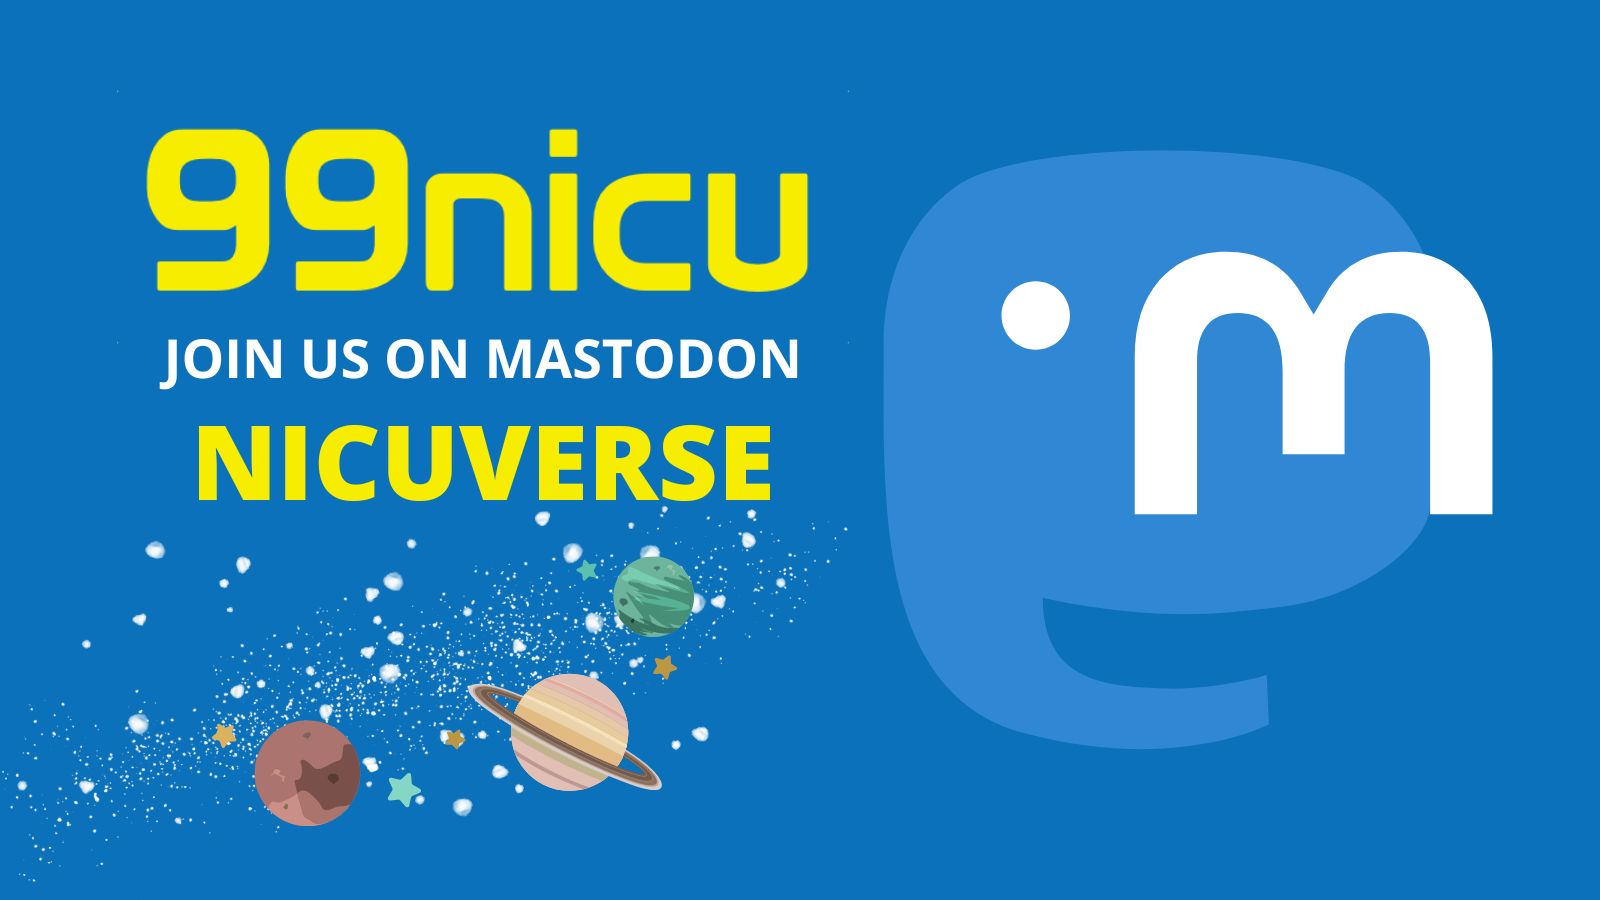 Our NICUVERSE has opened!